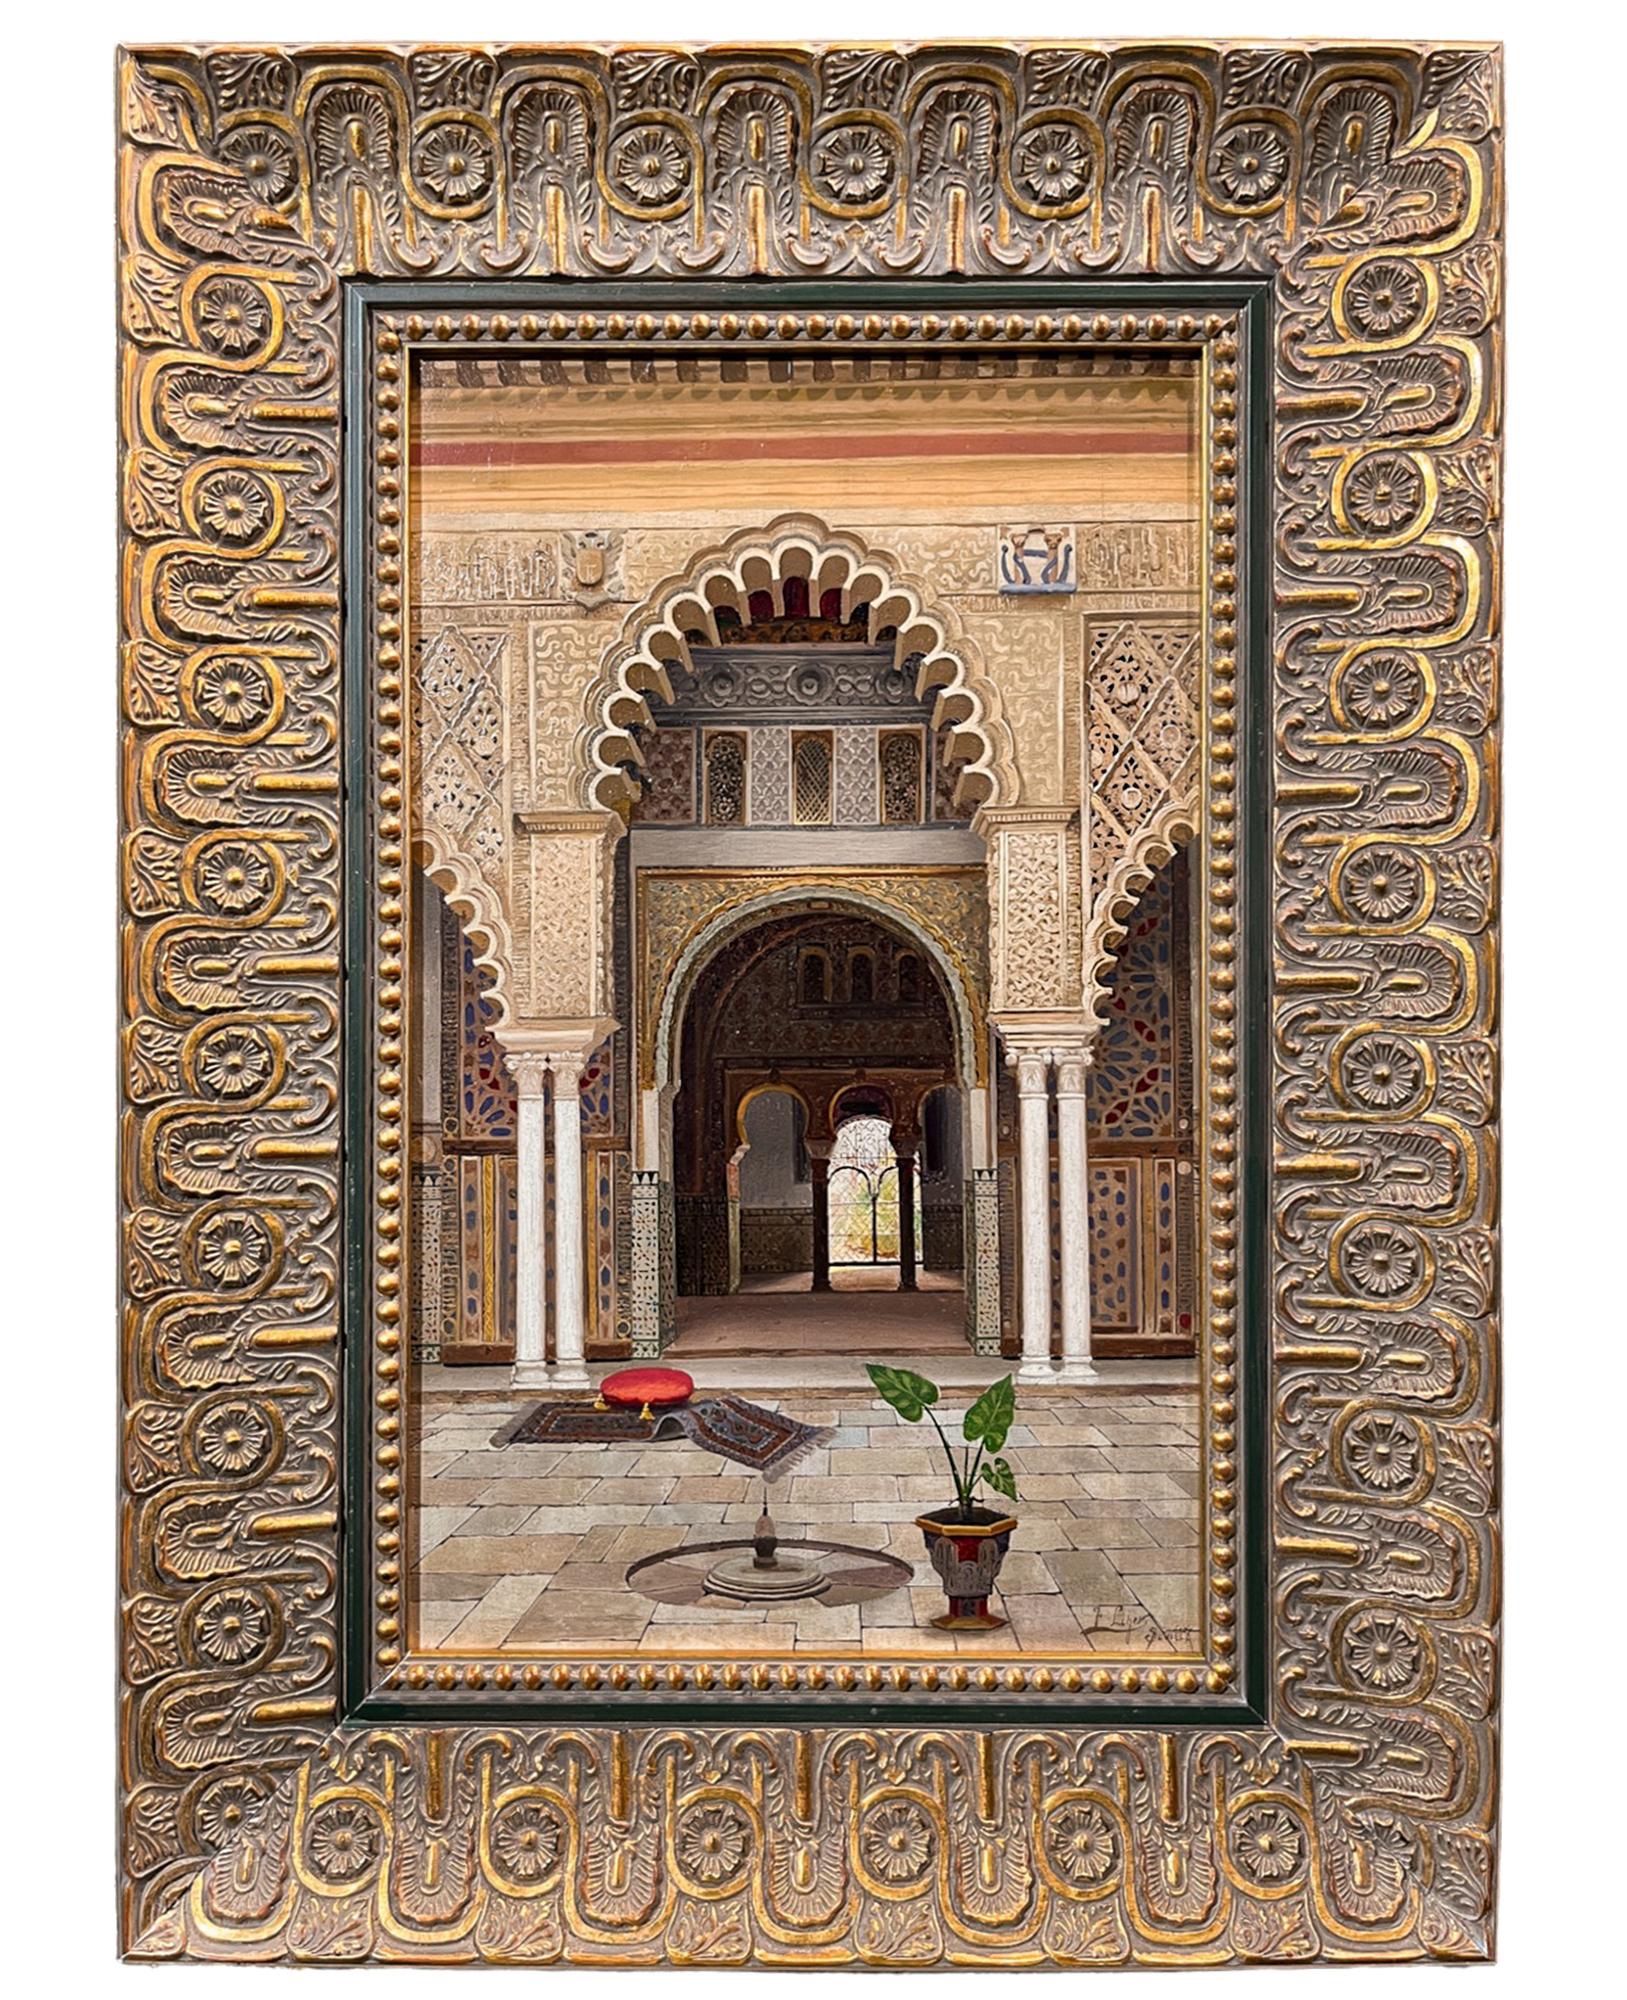 An interior depiction of the patio de las Doncellas Reales Alcazares de Sevilla, the oldest royal European palace still in use today in Seville, Spain. A beautiful Orientalist rendition of this grandiose space, the viewer peers through an archway